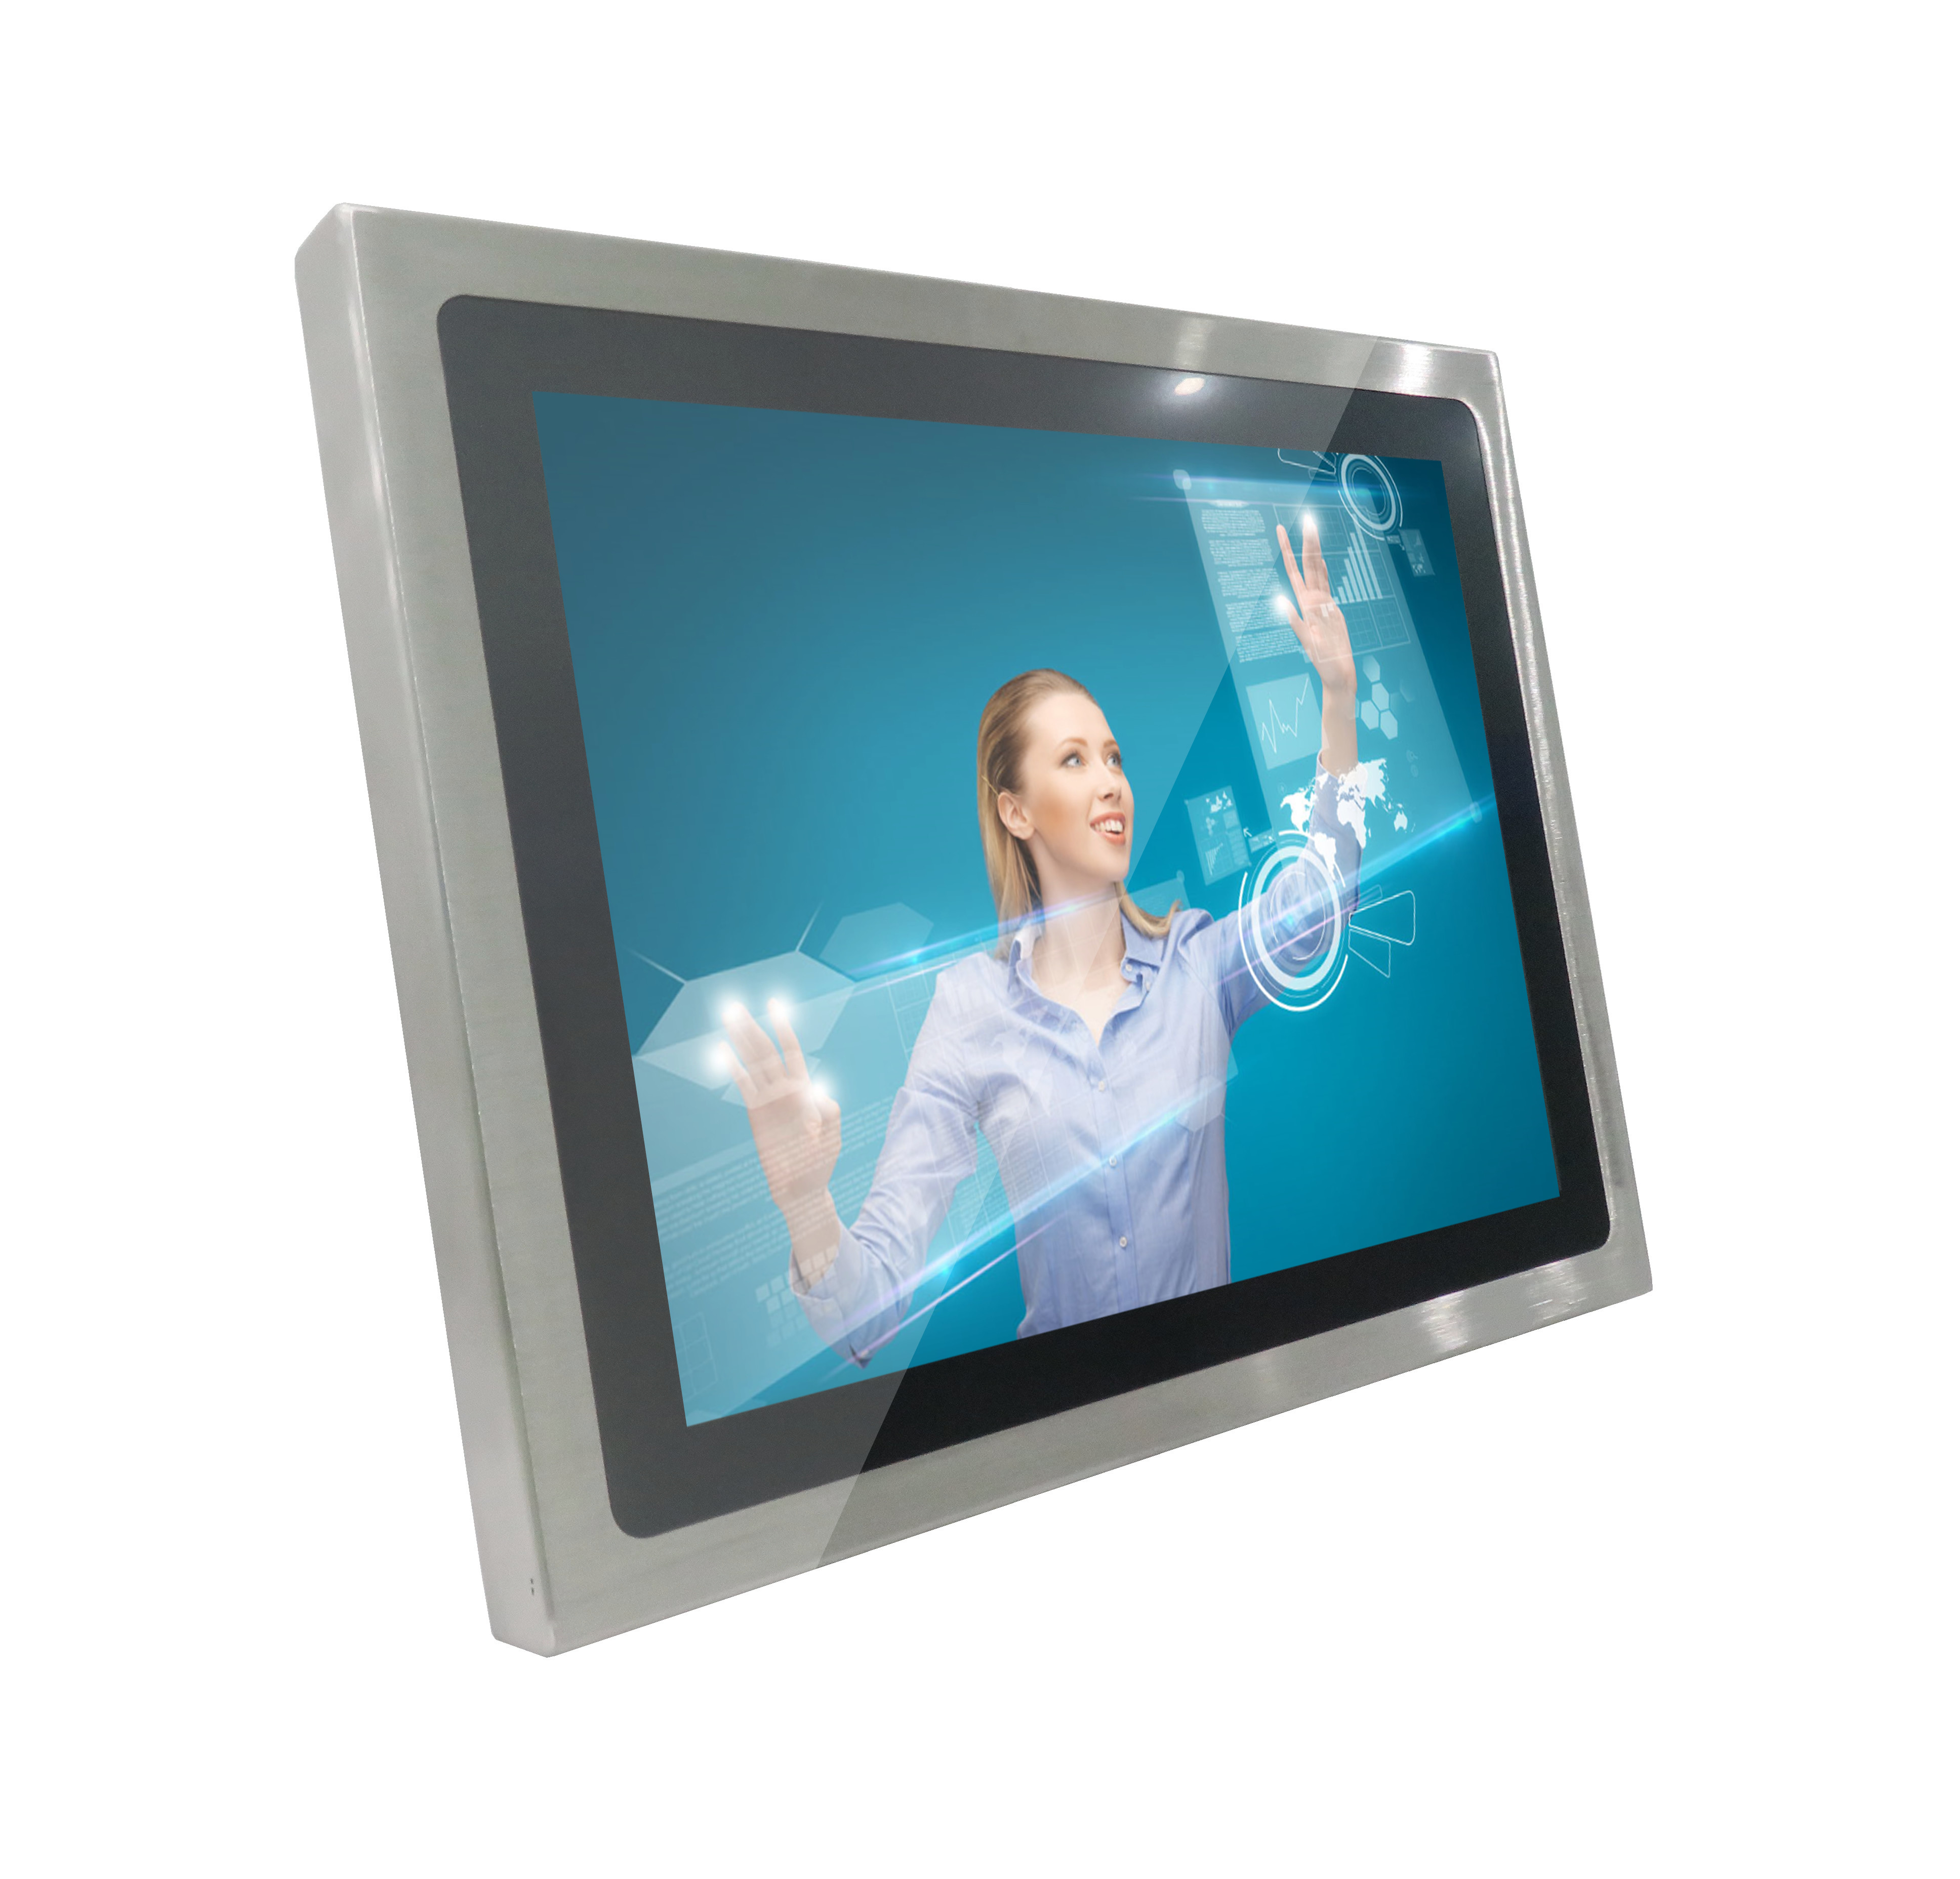 Buy Windows 10 Waterproof IP65 Panel PC Stainless Steel Capacitive Touch Screen at wholesale prices